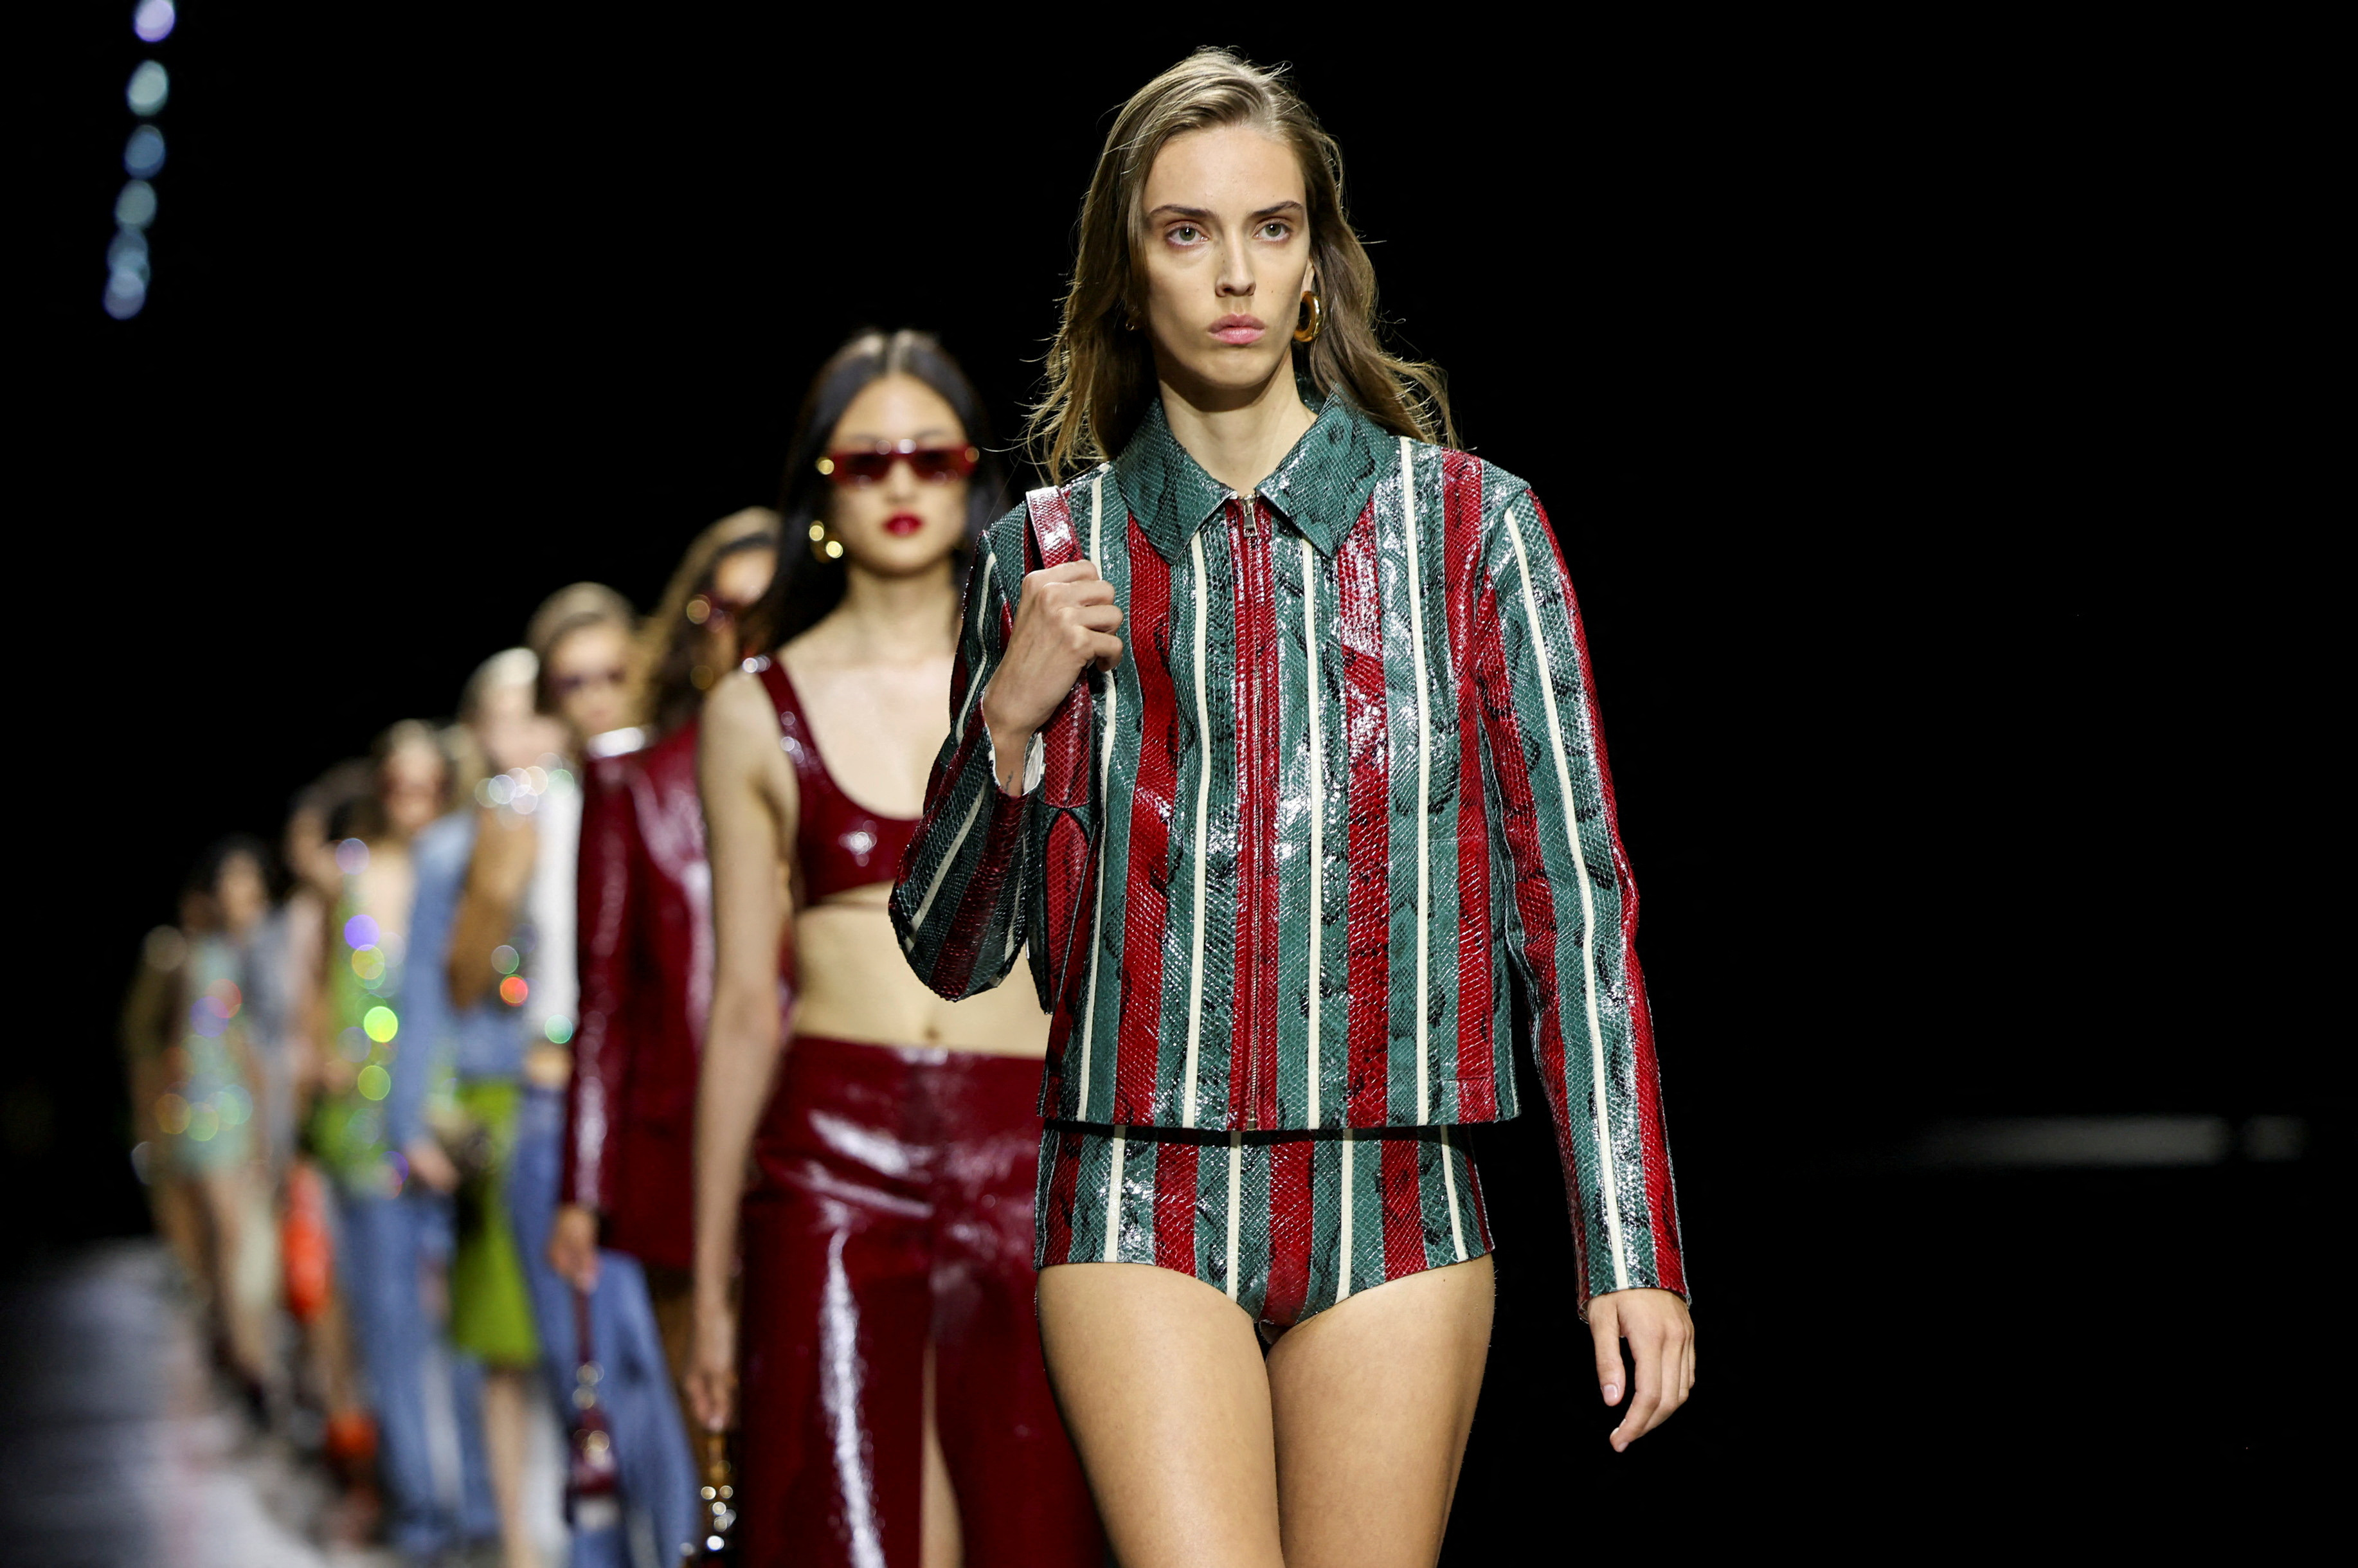 Sabato De Sarno's debut marks a new chapter for Gucci